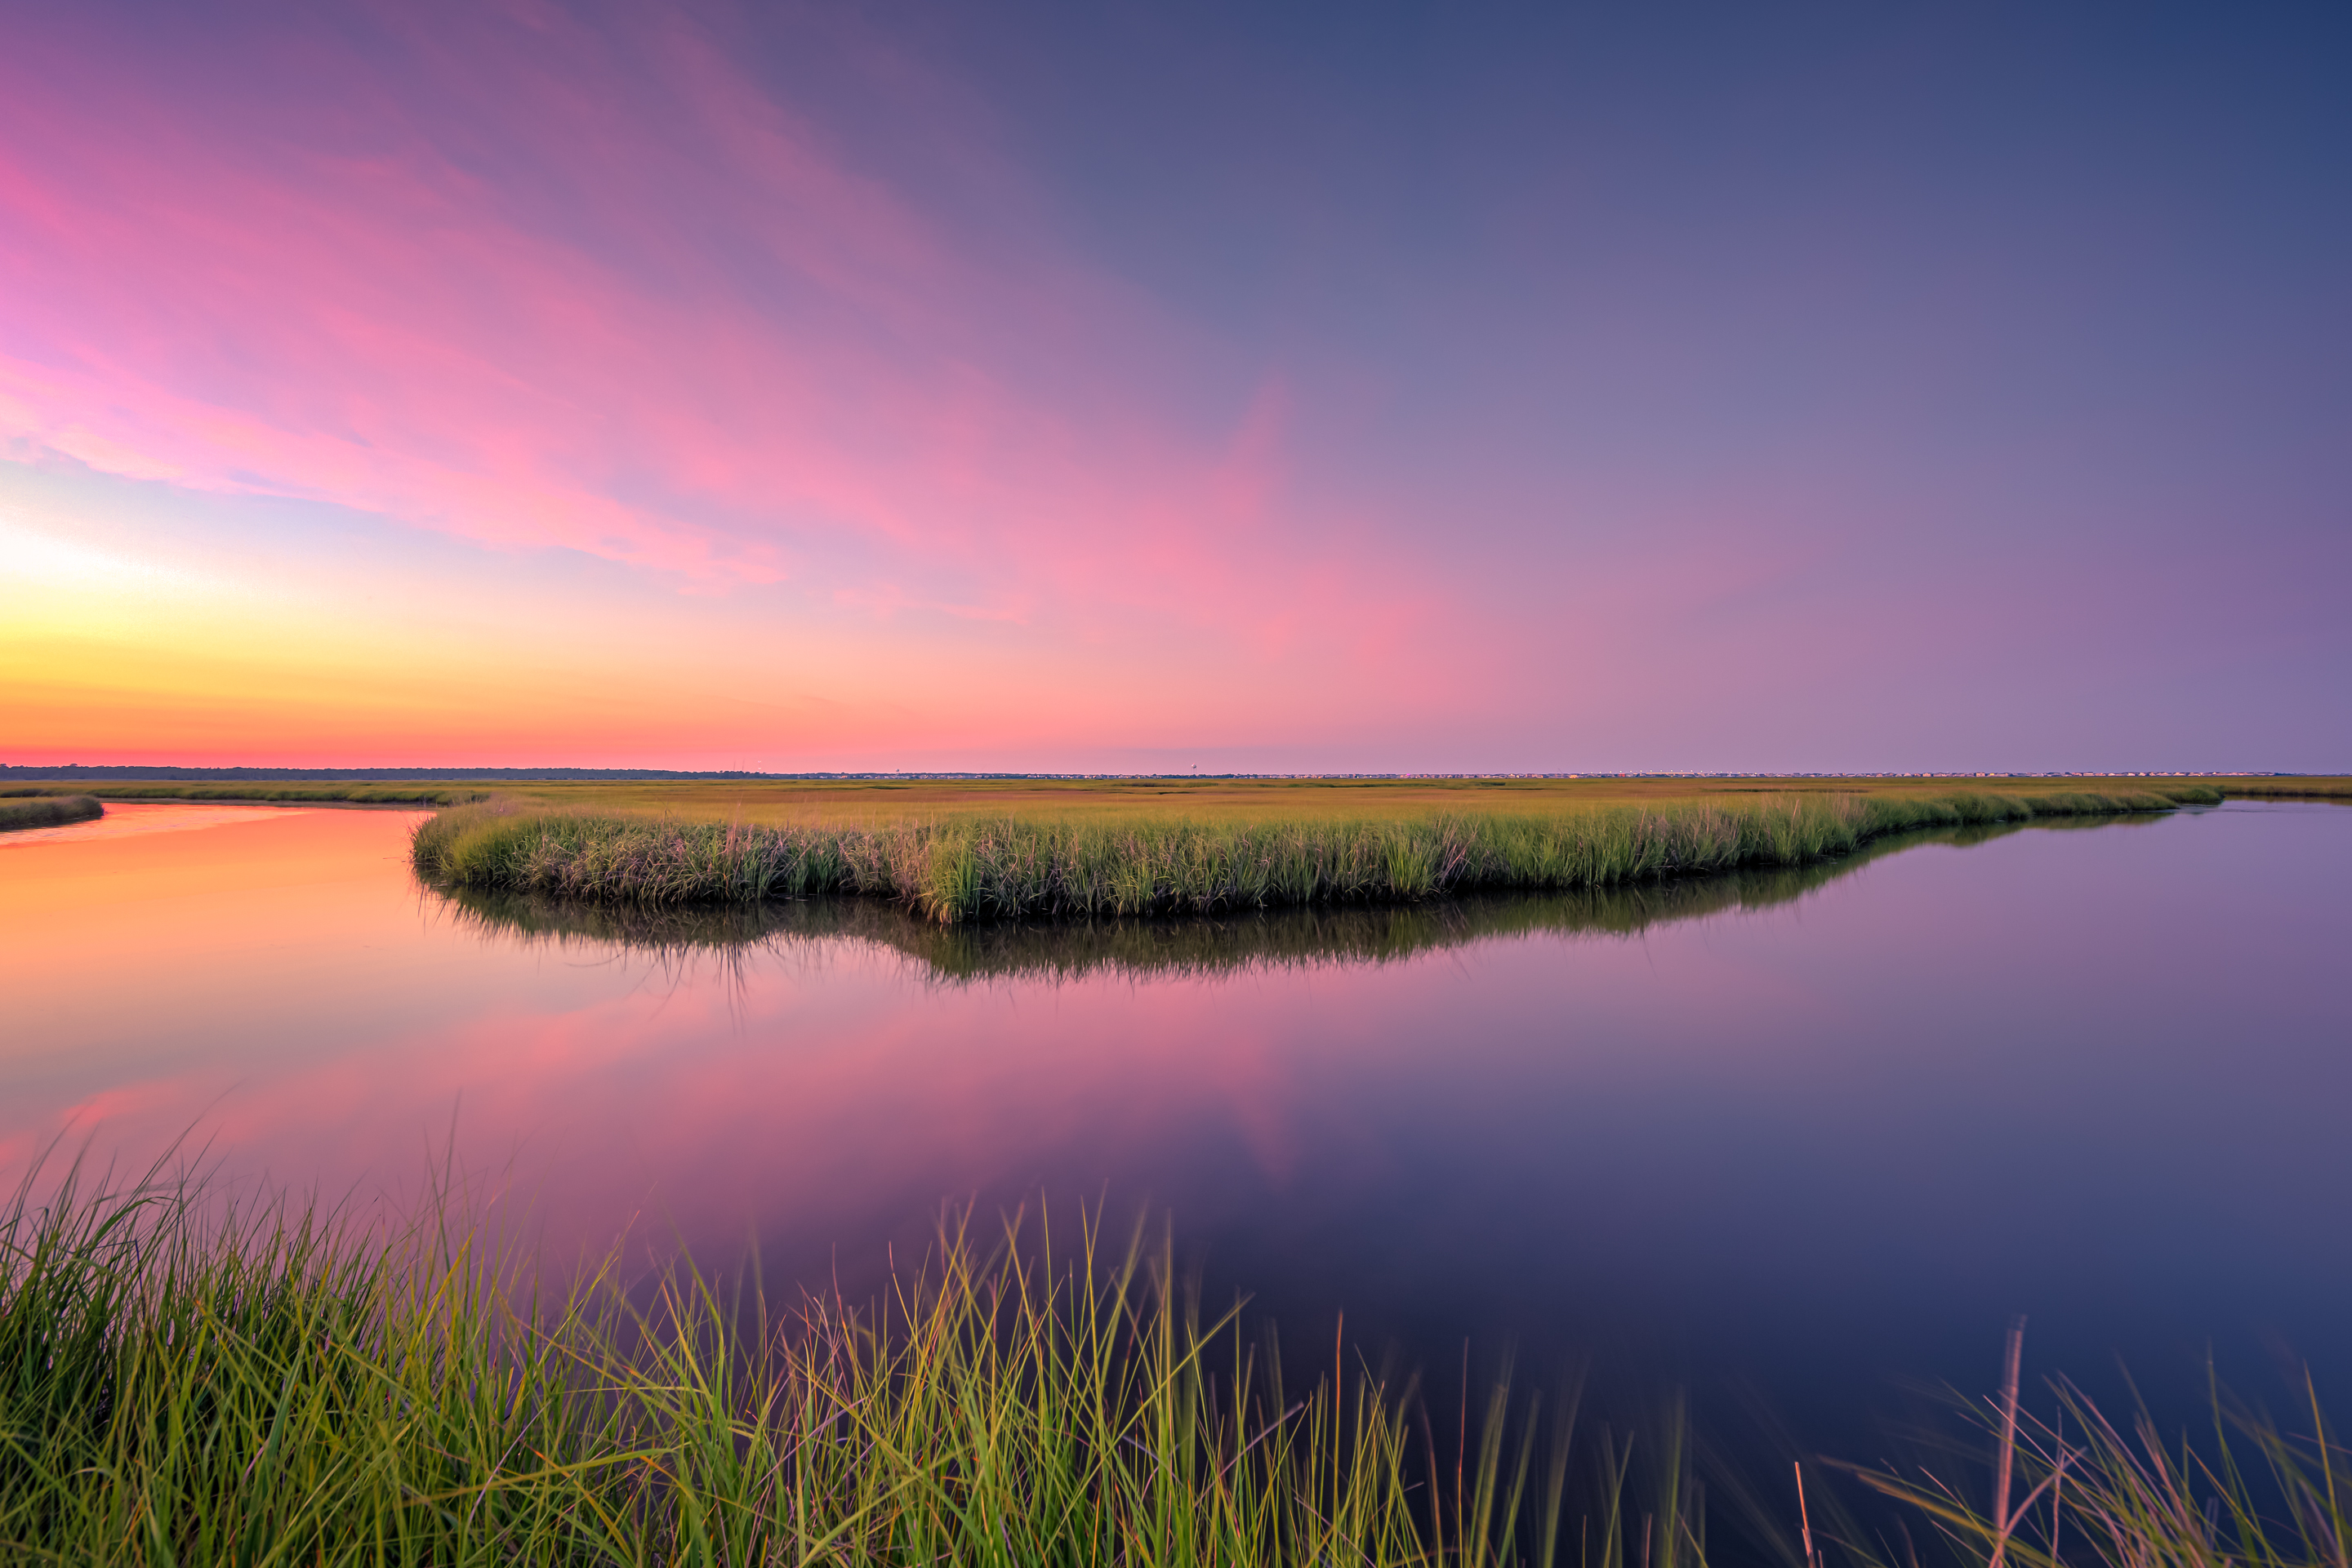 14mm wide angle sunset photo with pastel clouds and a glassy reflection on oxbow water feature at the salt marsh.